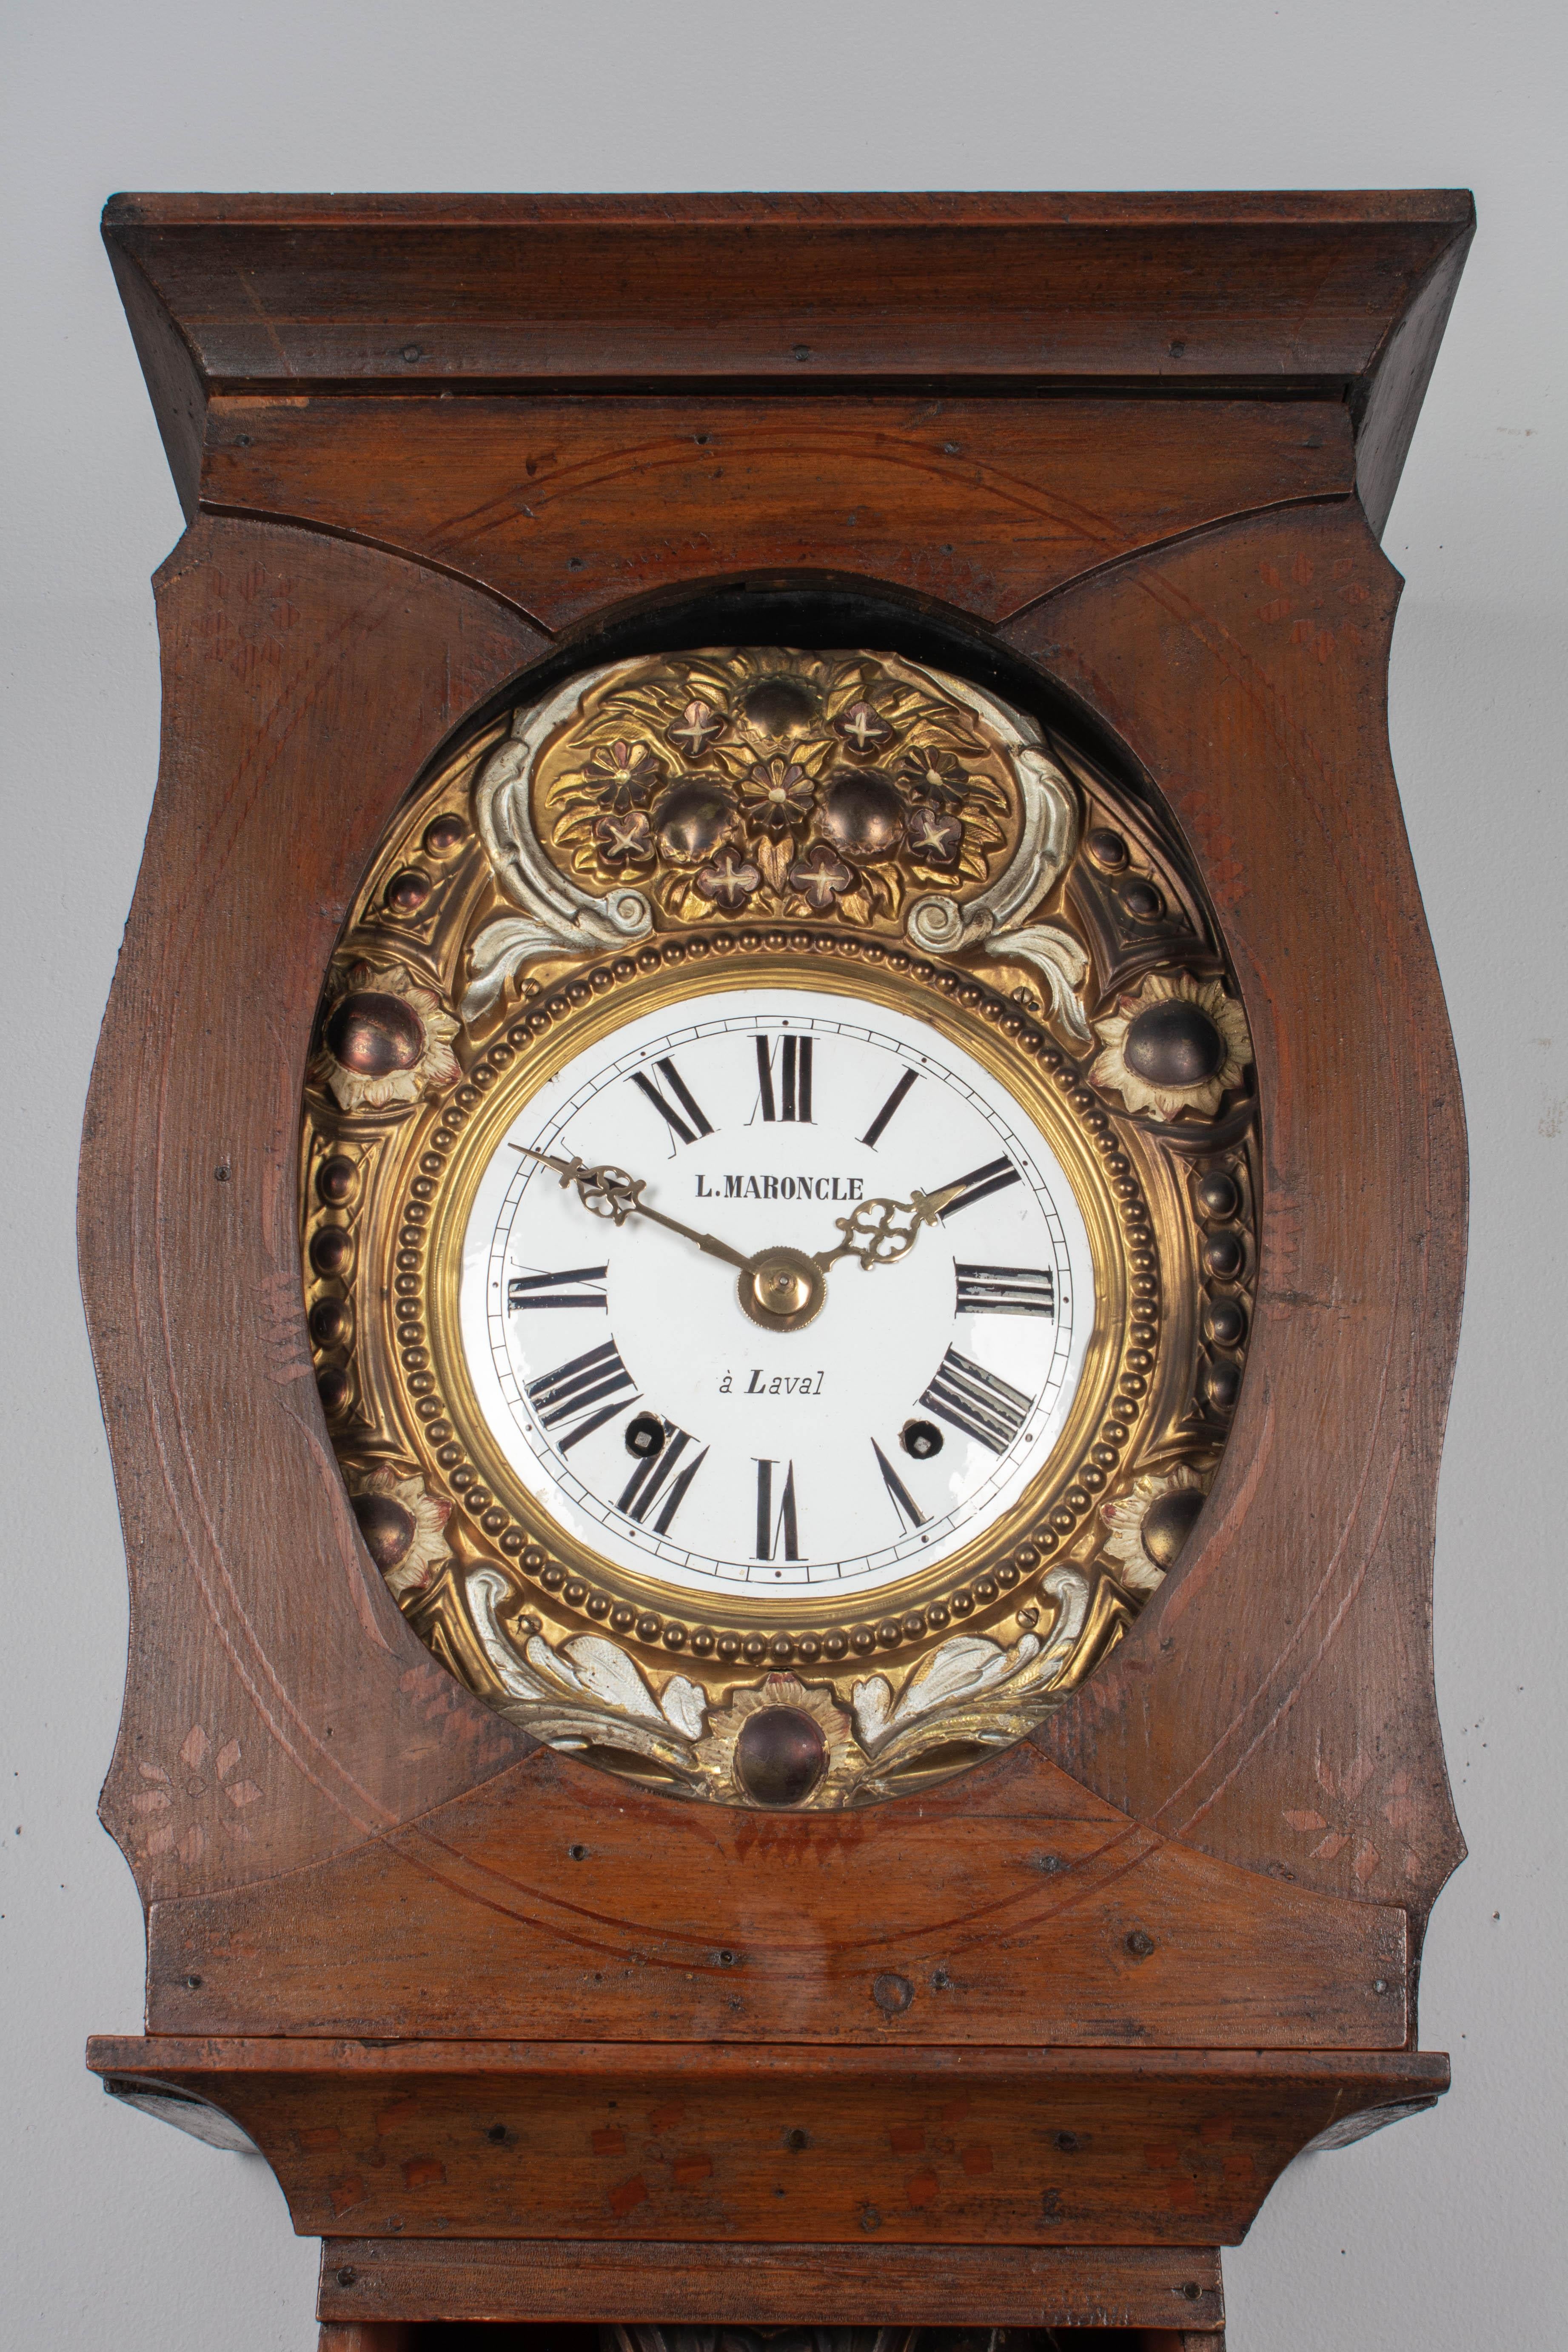 Embossed French Comtoise Grandfather Clock or Comtoise